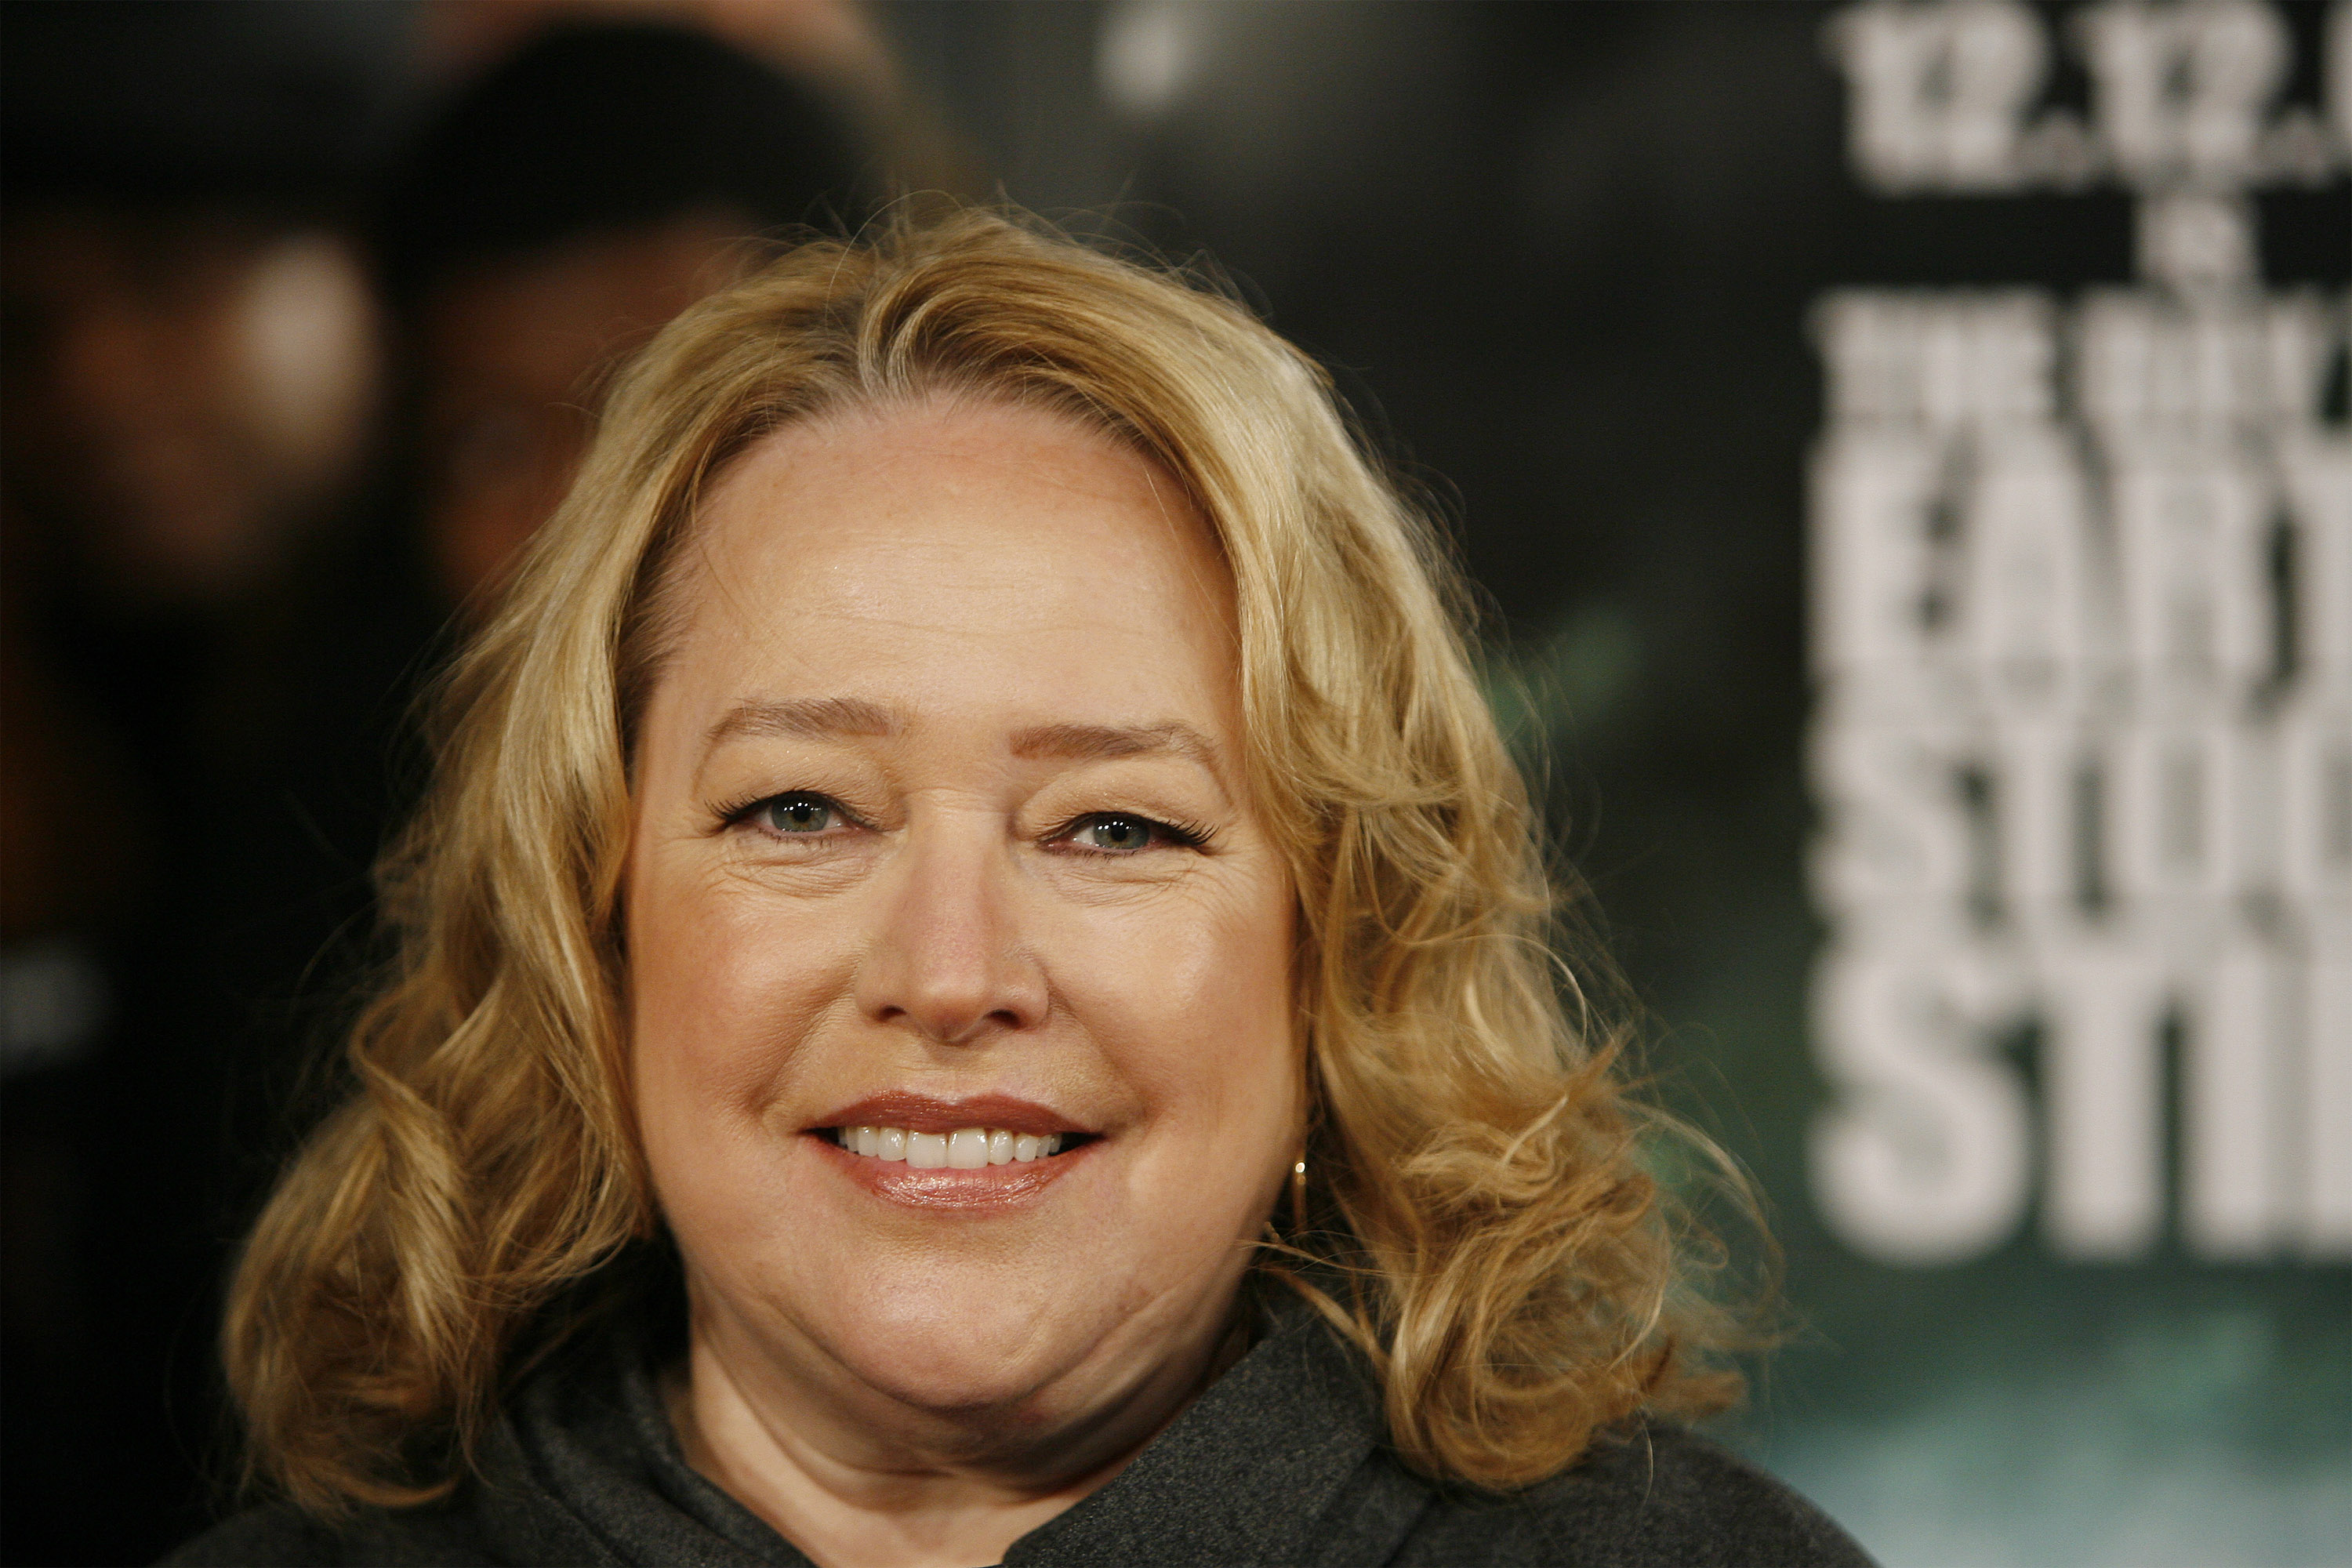 More Pictures Of Kathy Bates. kathy bates images. 